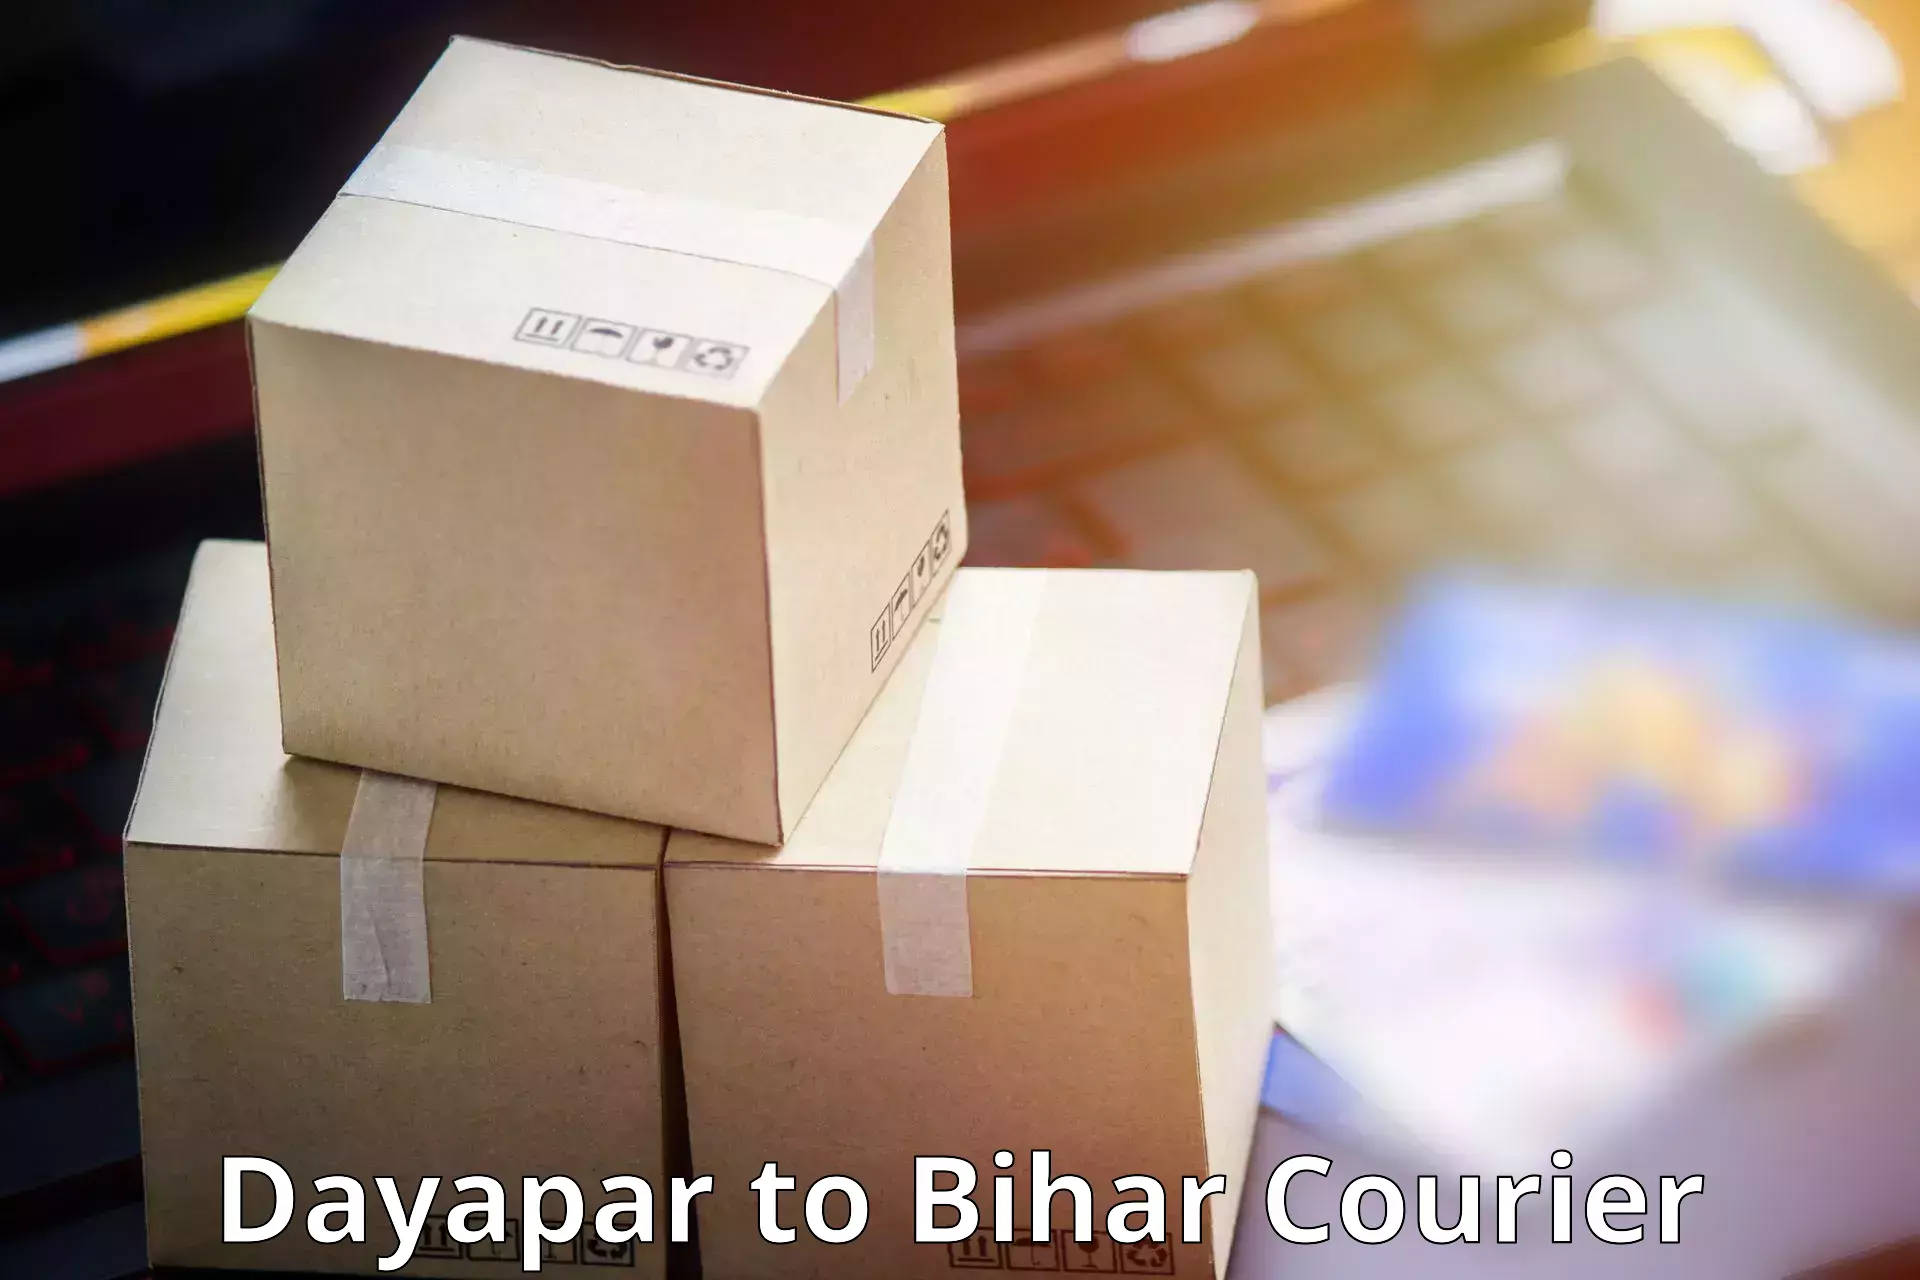 Large-scale shipping solutions Dayapar to Aurai